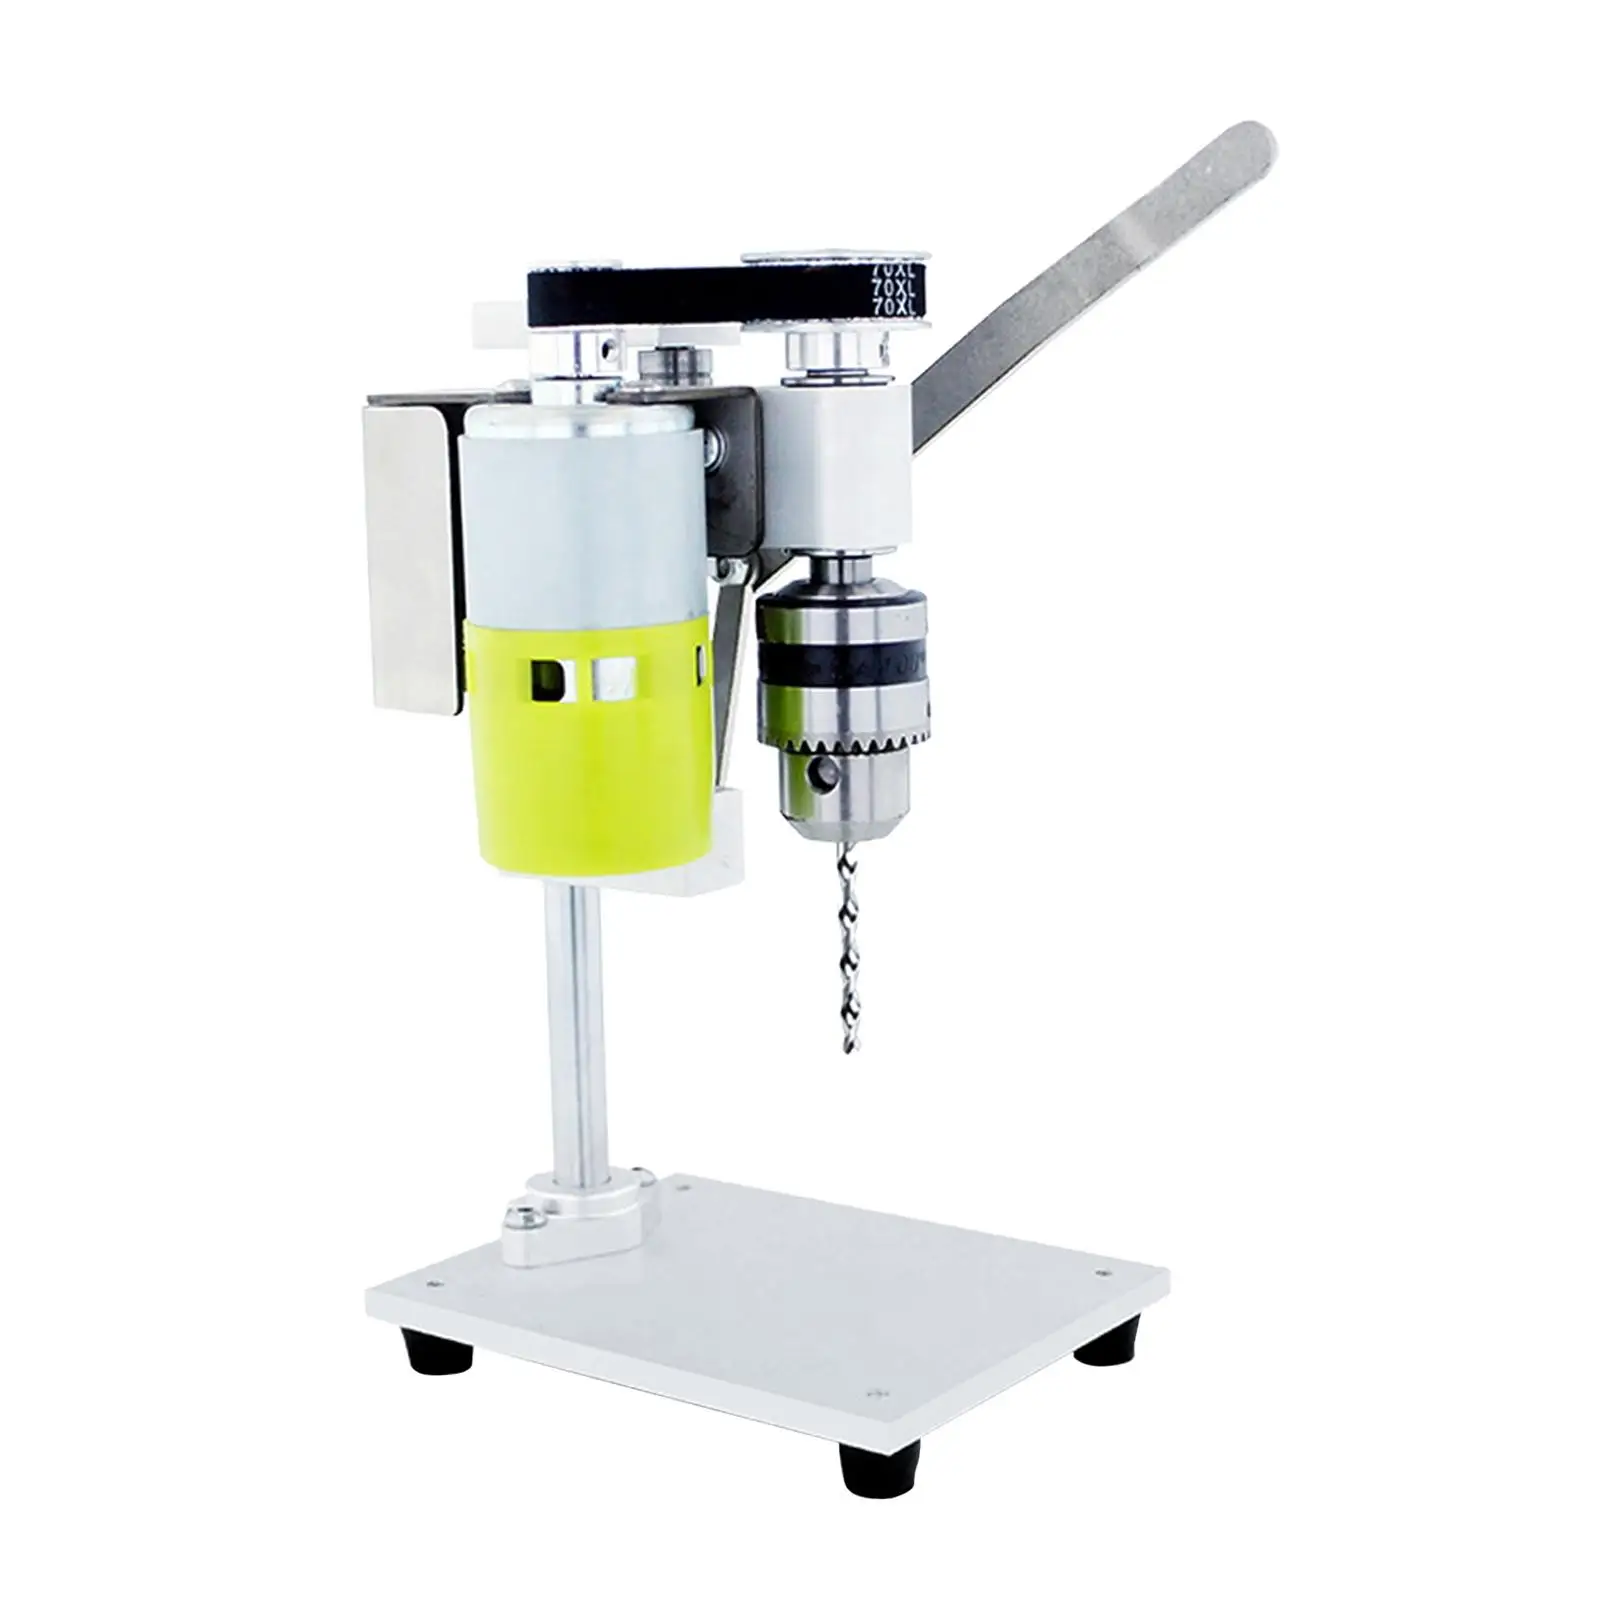 Small Benchtop Drill Presses High Precision Repair Tool Floor Drill Press Stand Table Tapping Machine Milling Machine Power Tool